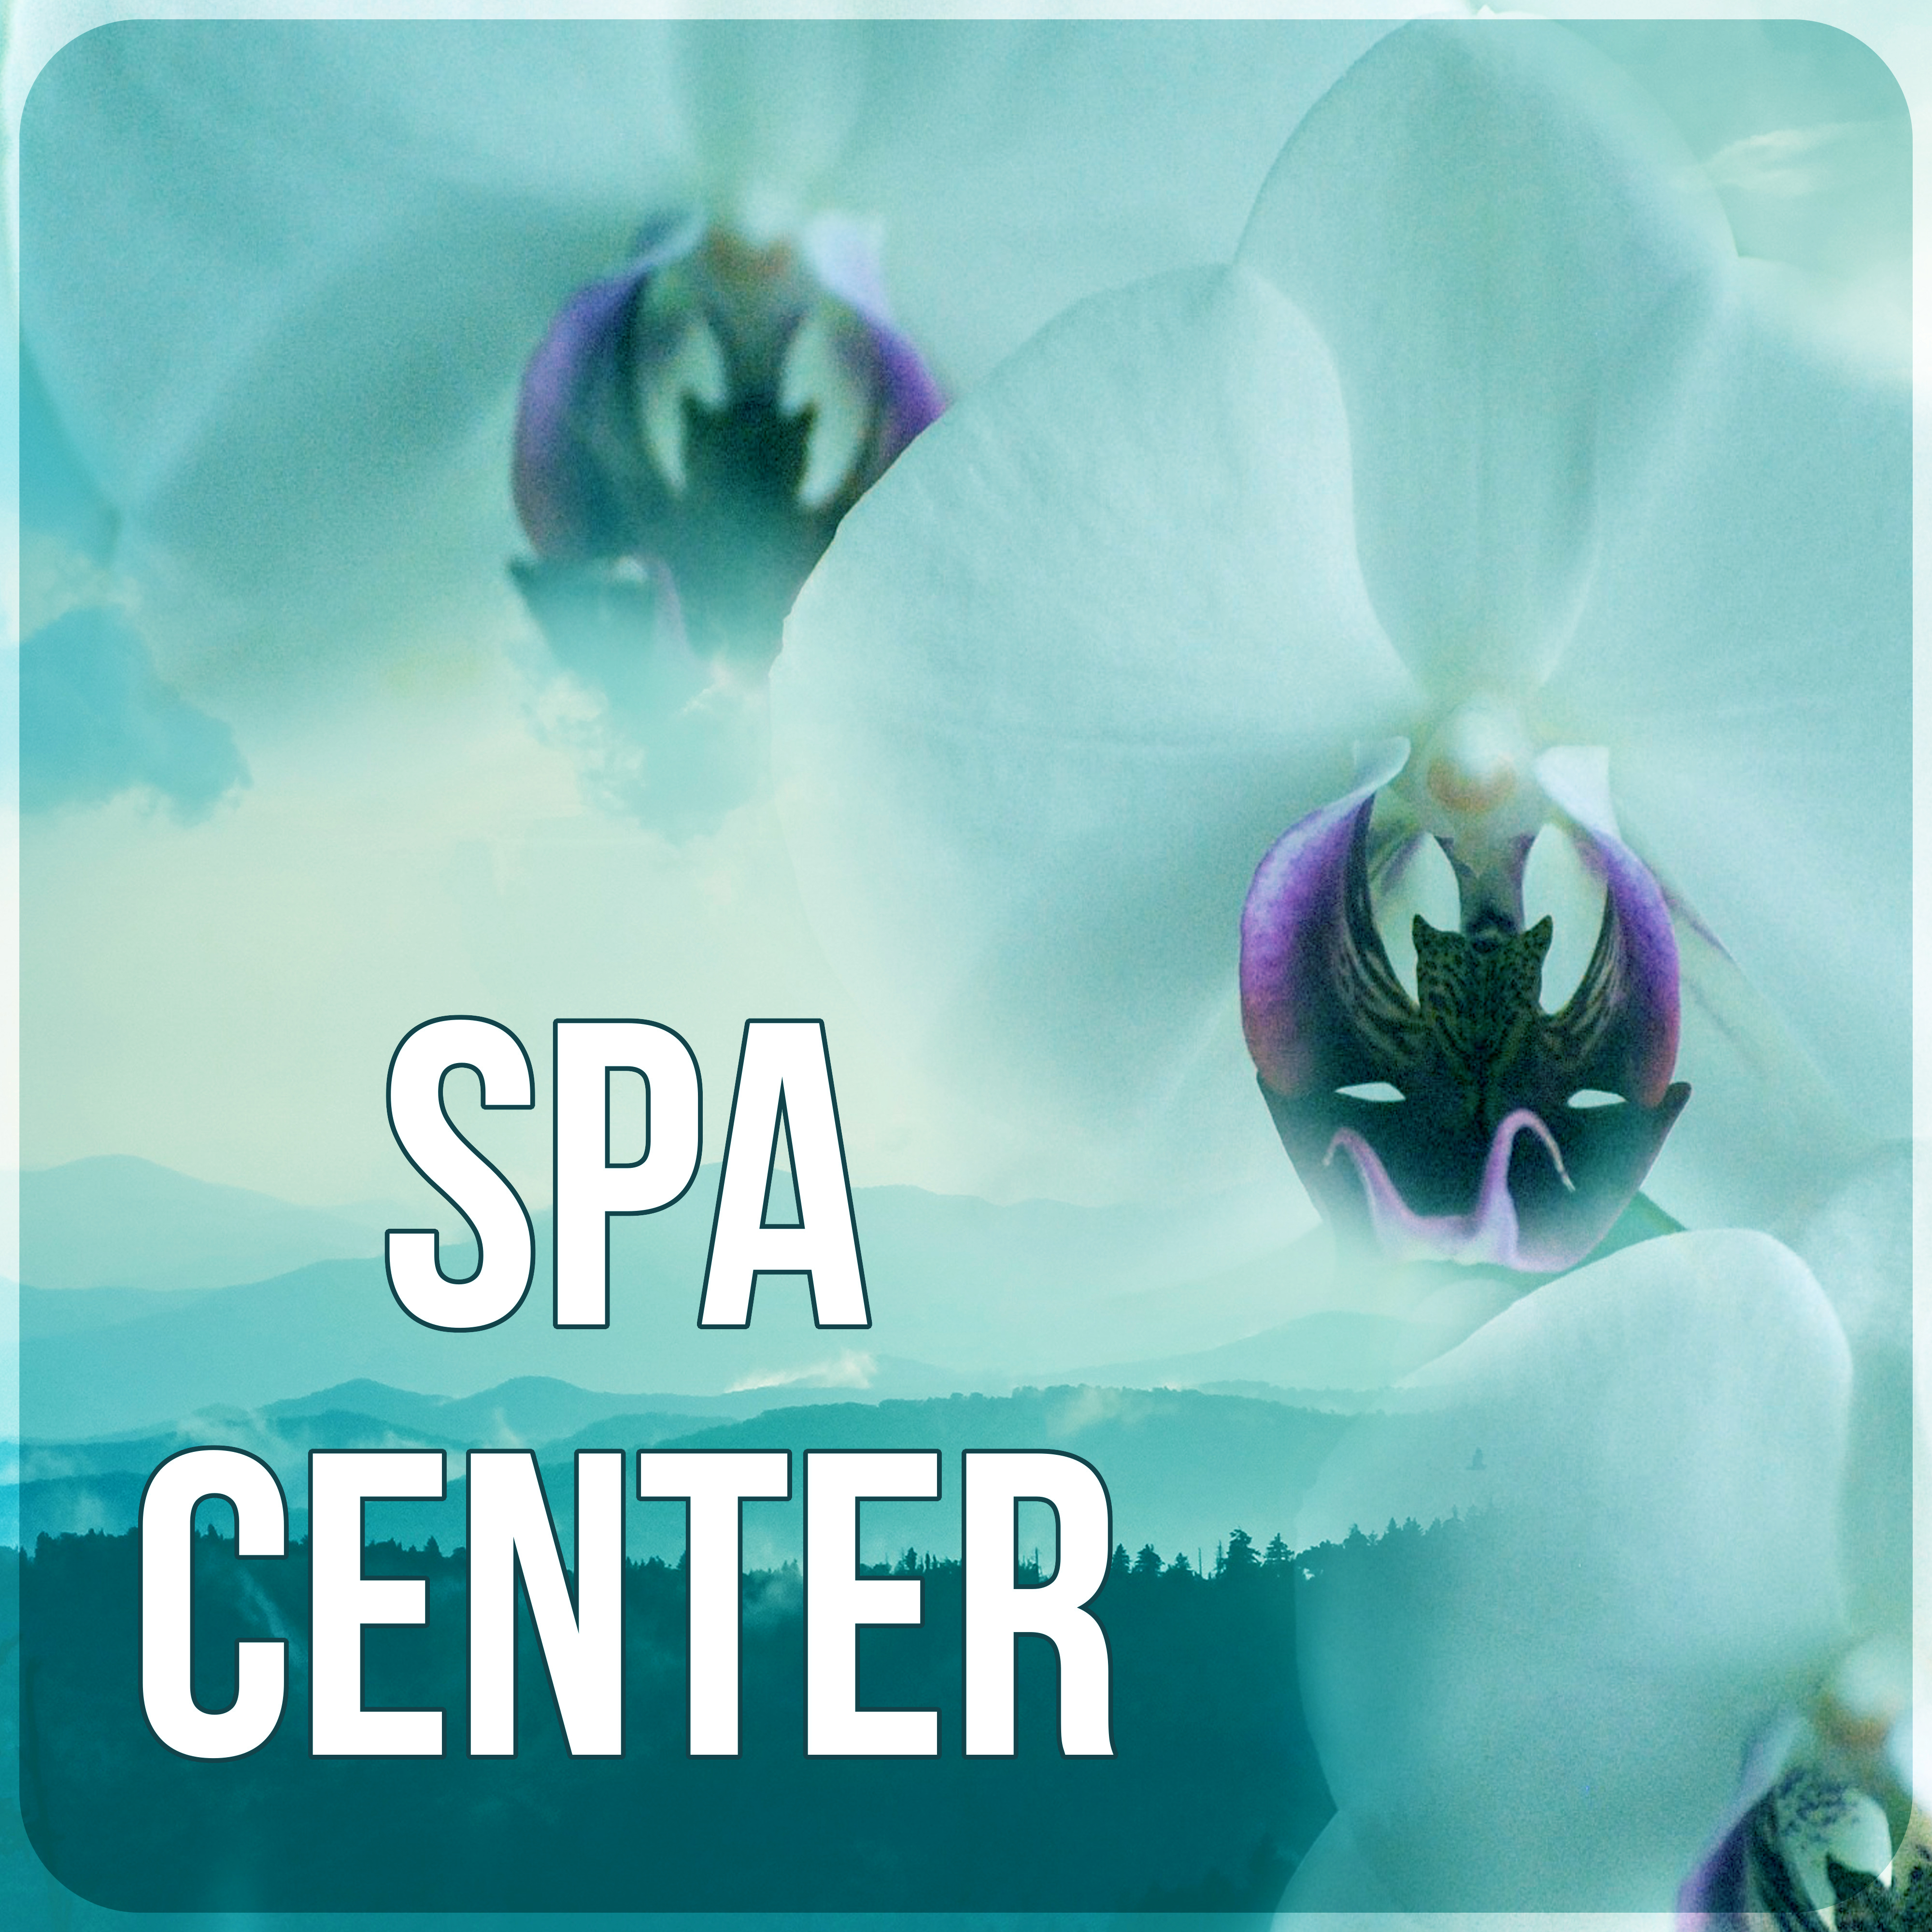 Spa Center - Background Music for Inner Peace, New Age Meditation and Relaxation for Aqua Day Spa, Sounds of Nature, Center Hotel Spa, Gentle Massage Music for Aromatherapy,